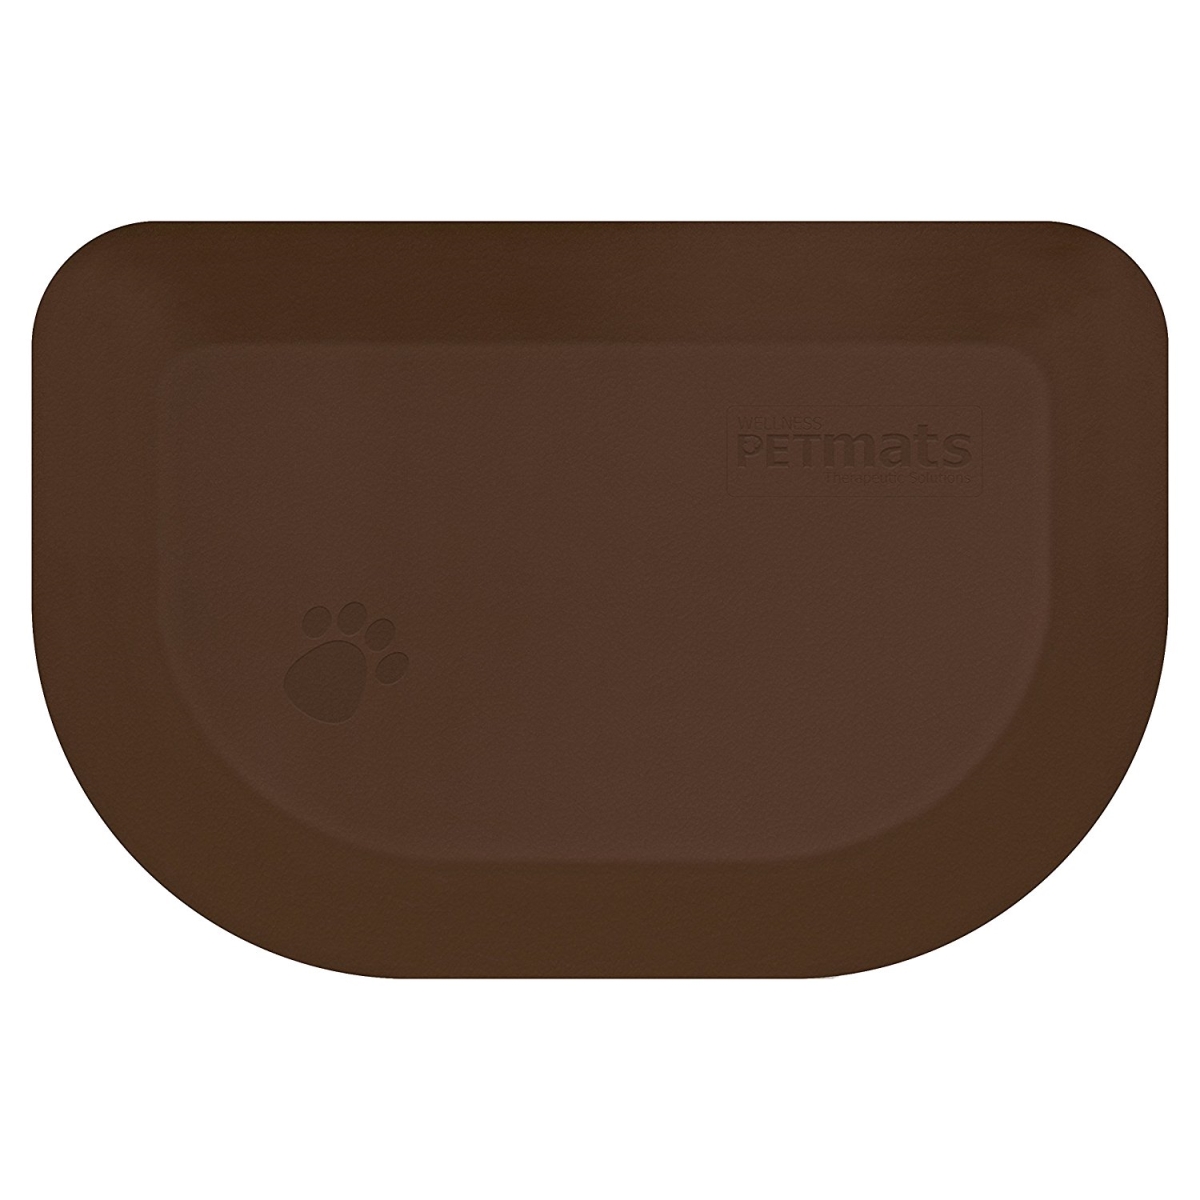 Pm1812rbrn Wellness Petmats Rounded Pet Mat For Dogs - Brown Bark, 18 X 12 X 1 In.